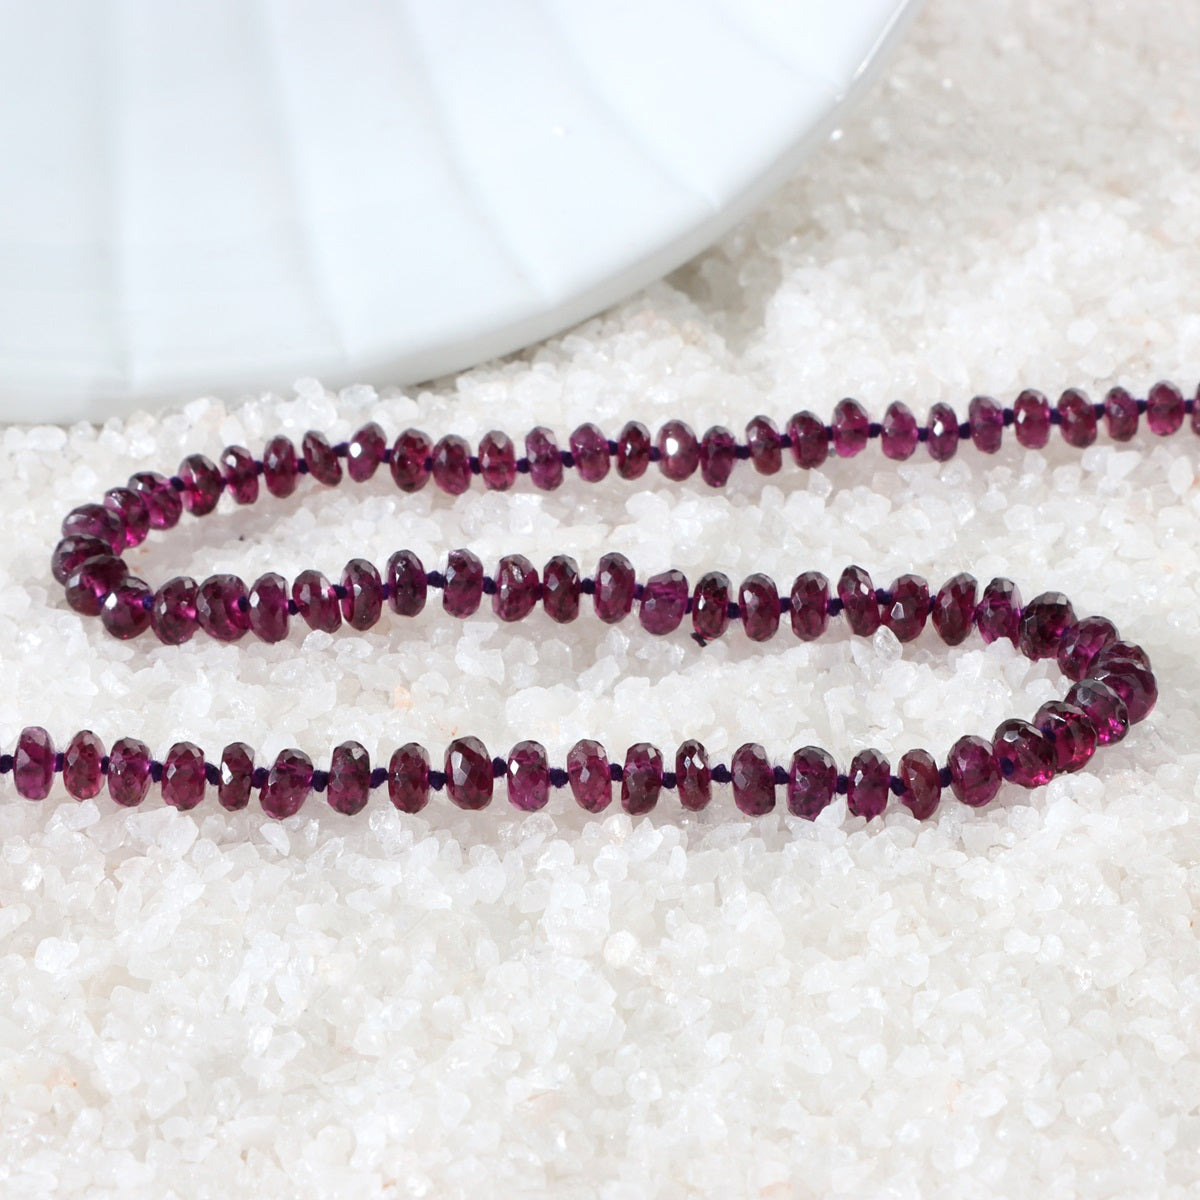 Close-up of faceted rondelle Purple Garnet gemstone beads on necklace